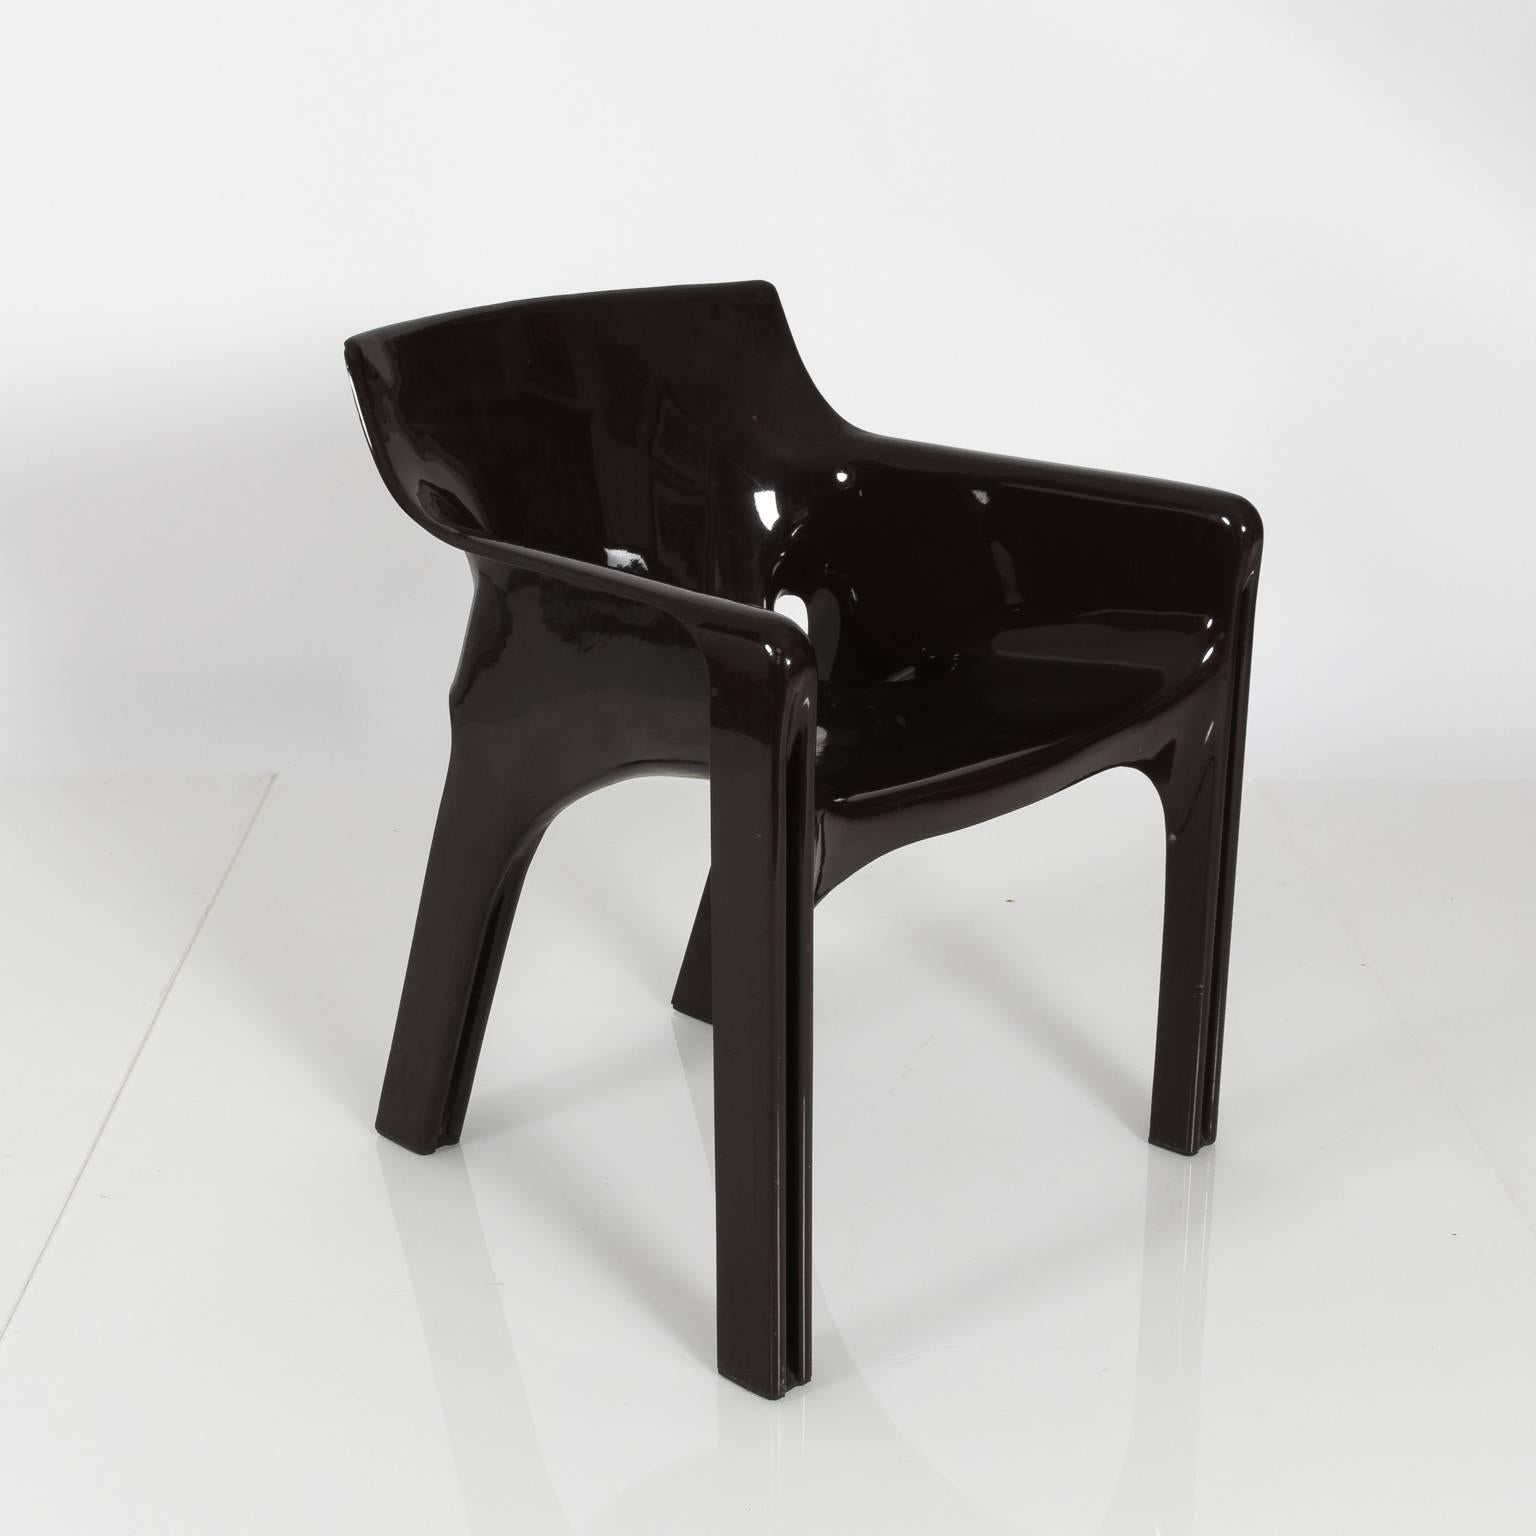 20th Century Lounge Chair by Vico Magistretti